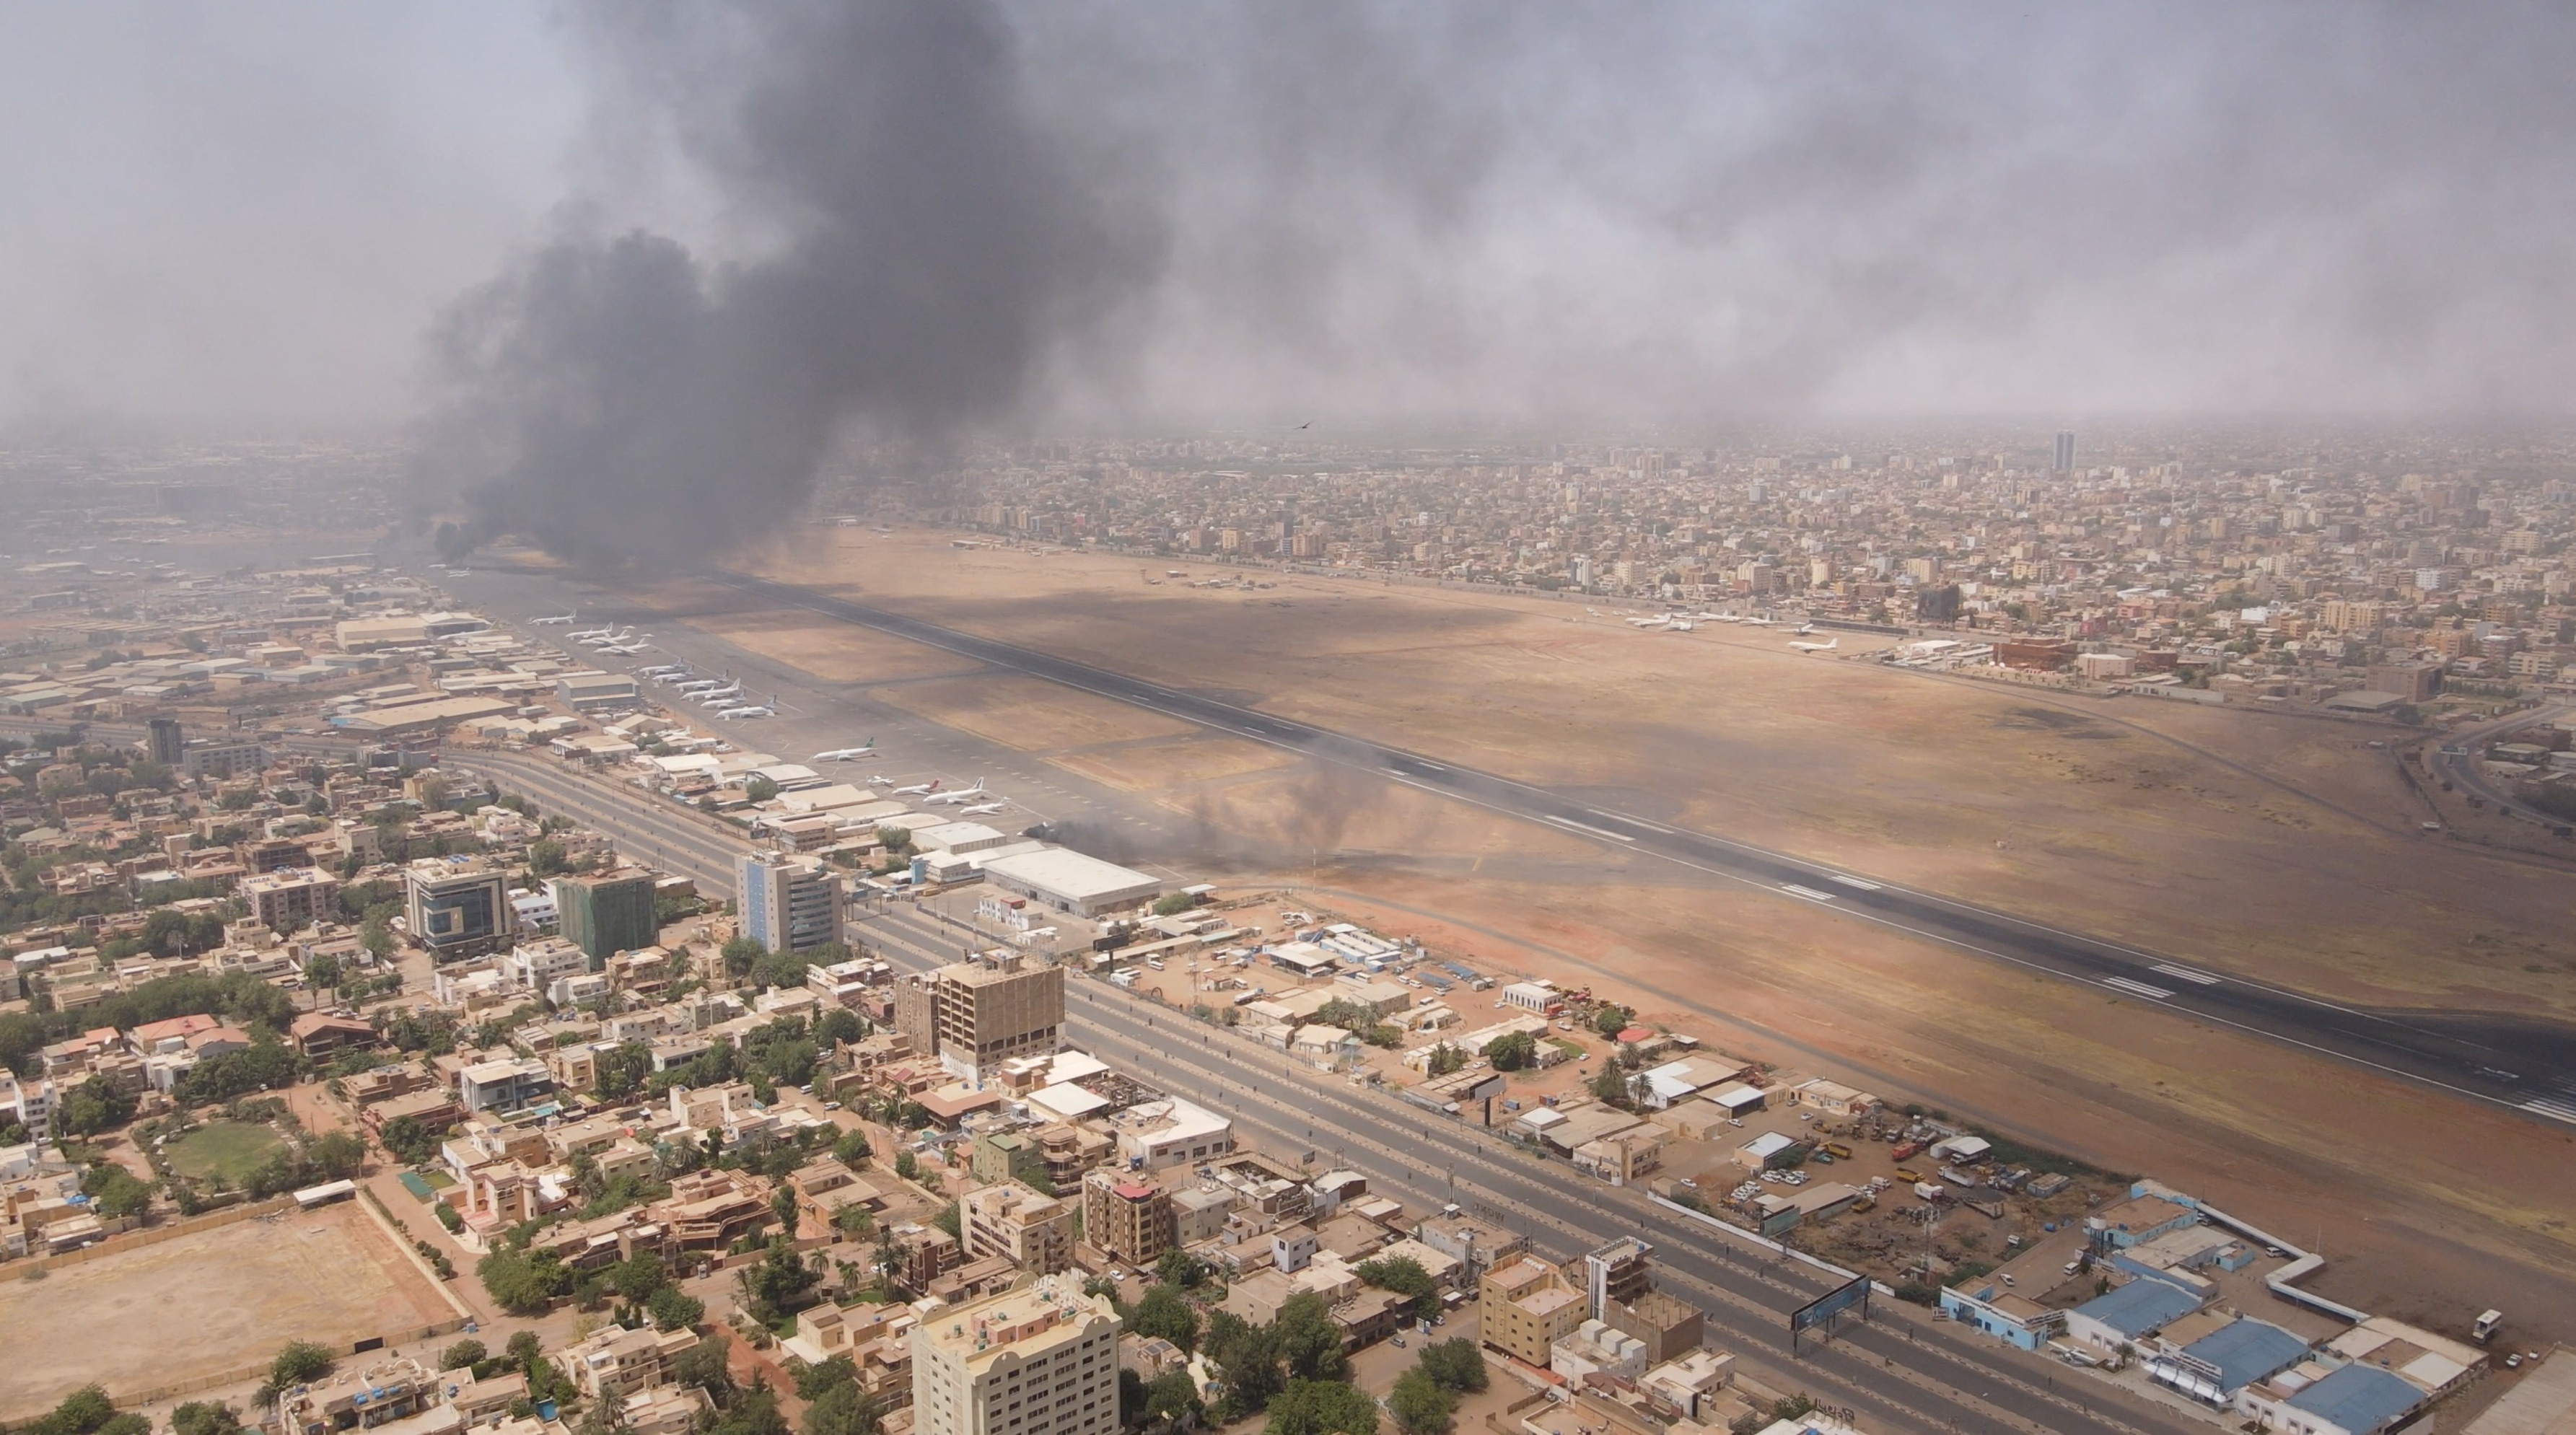 Smoke rises over the city as army and paramilitaries clash in power struggle, in Khartoum